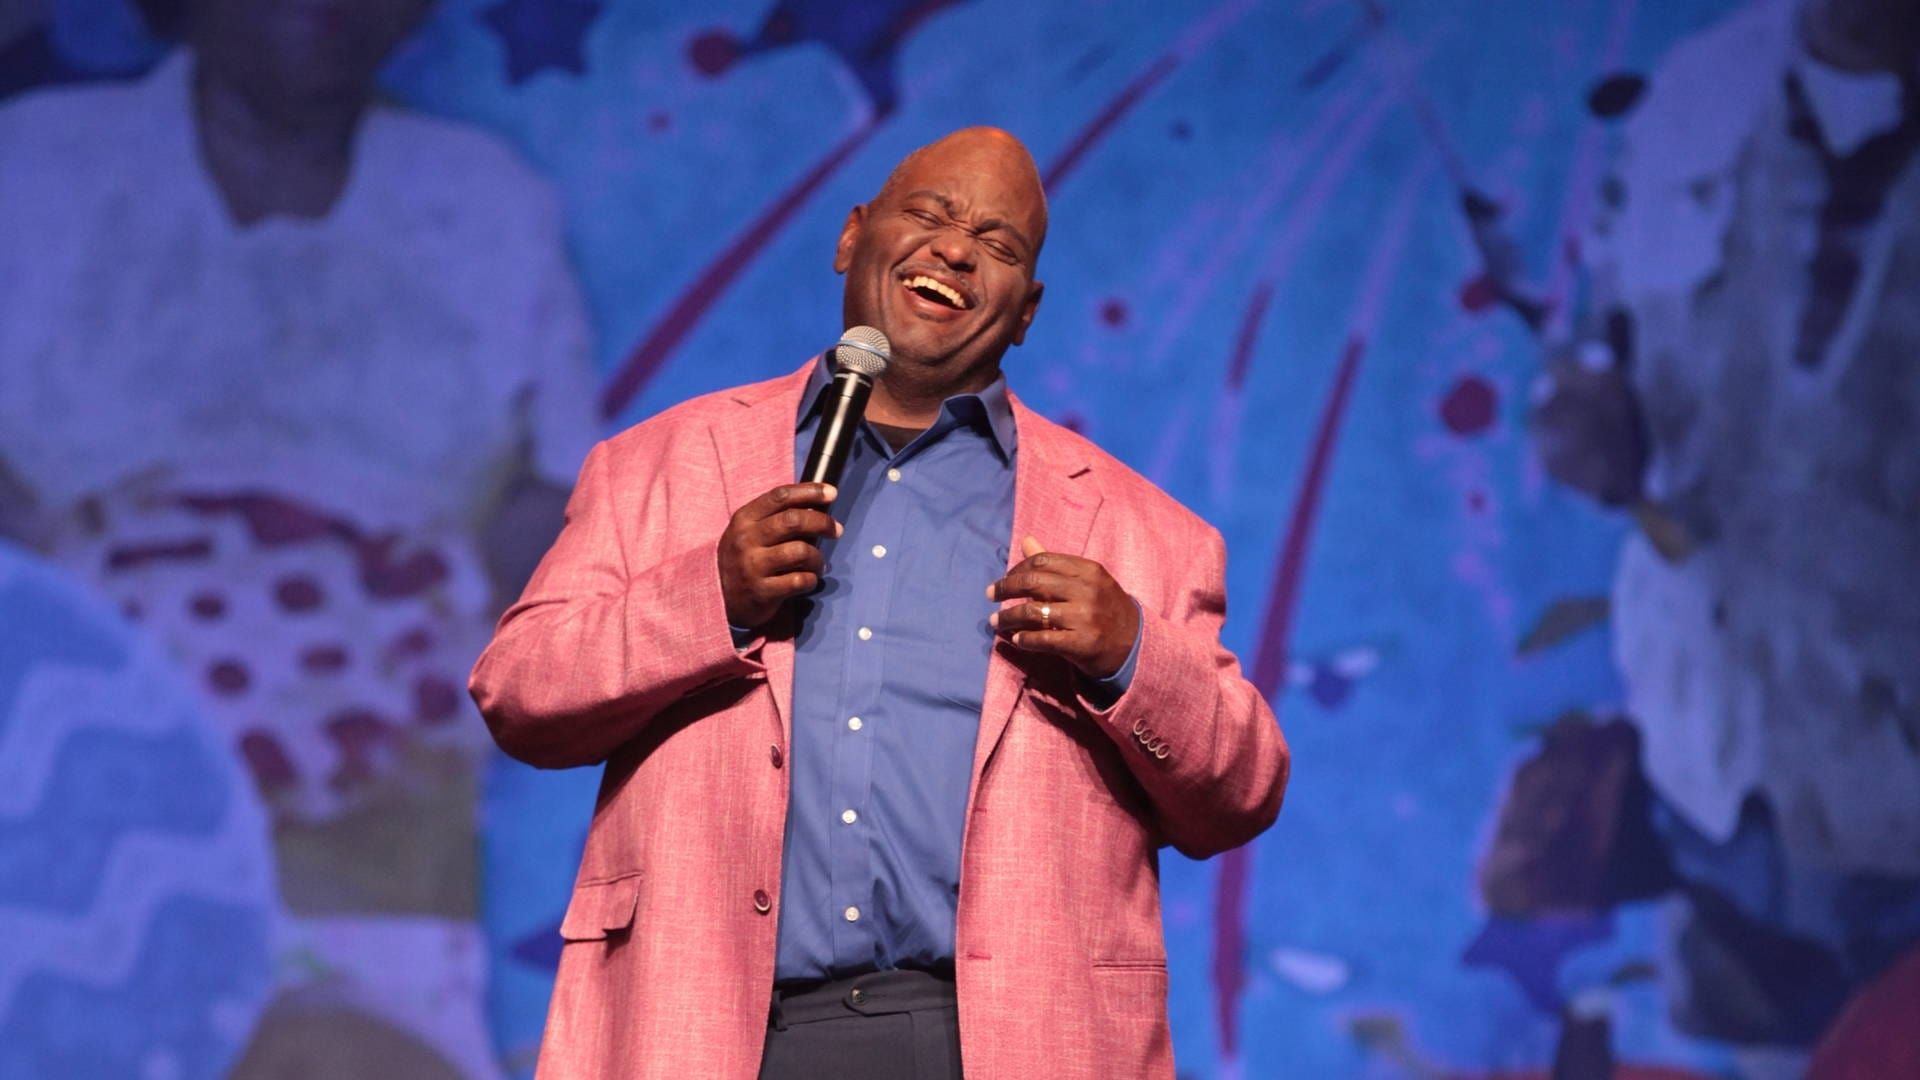 Lavell Crawford: Home for the Holidays background